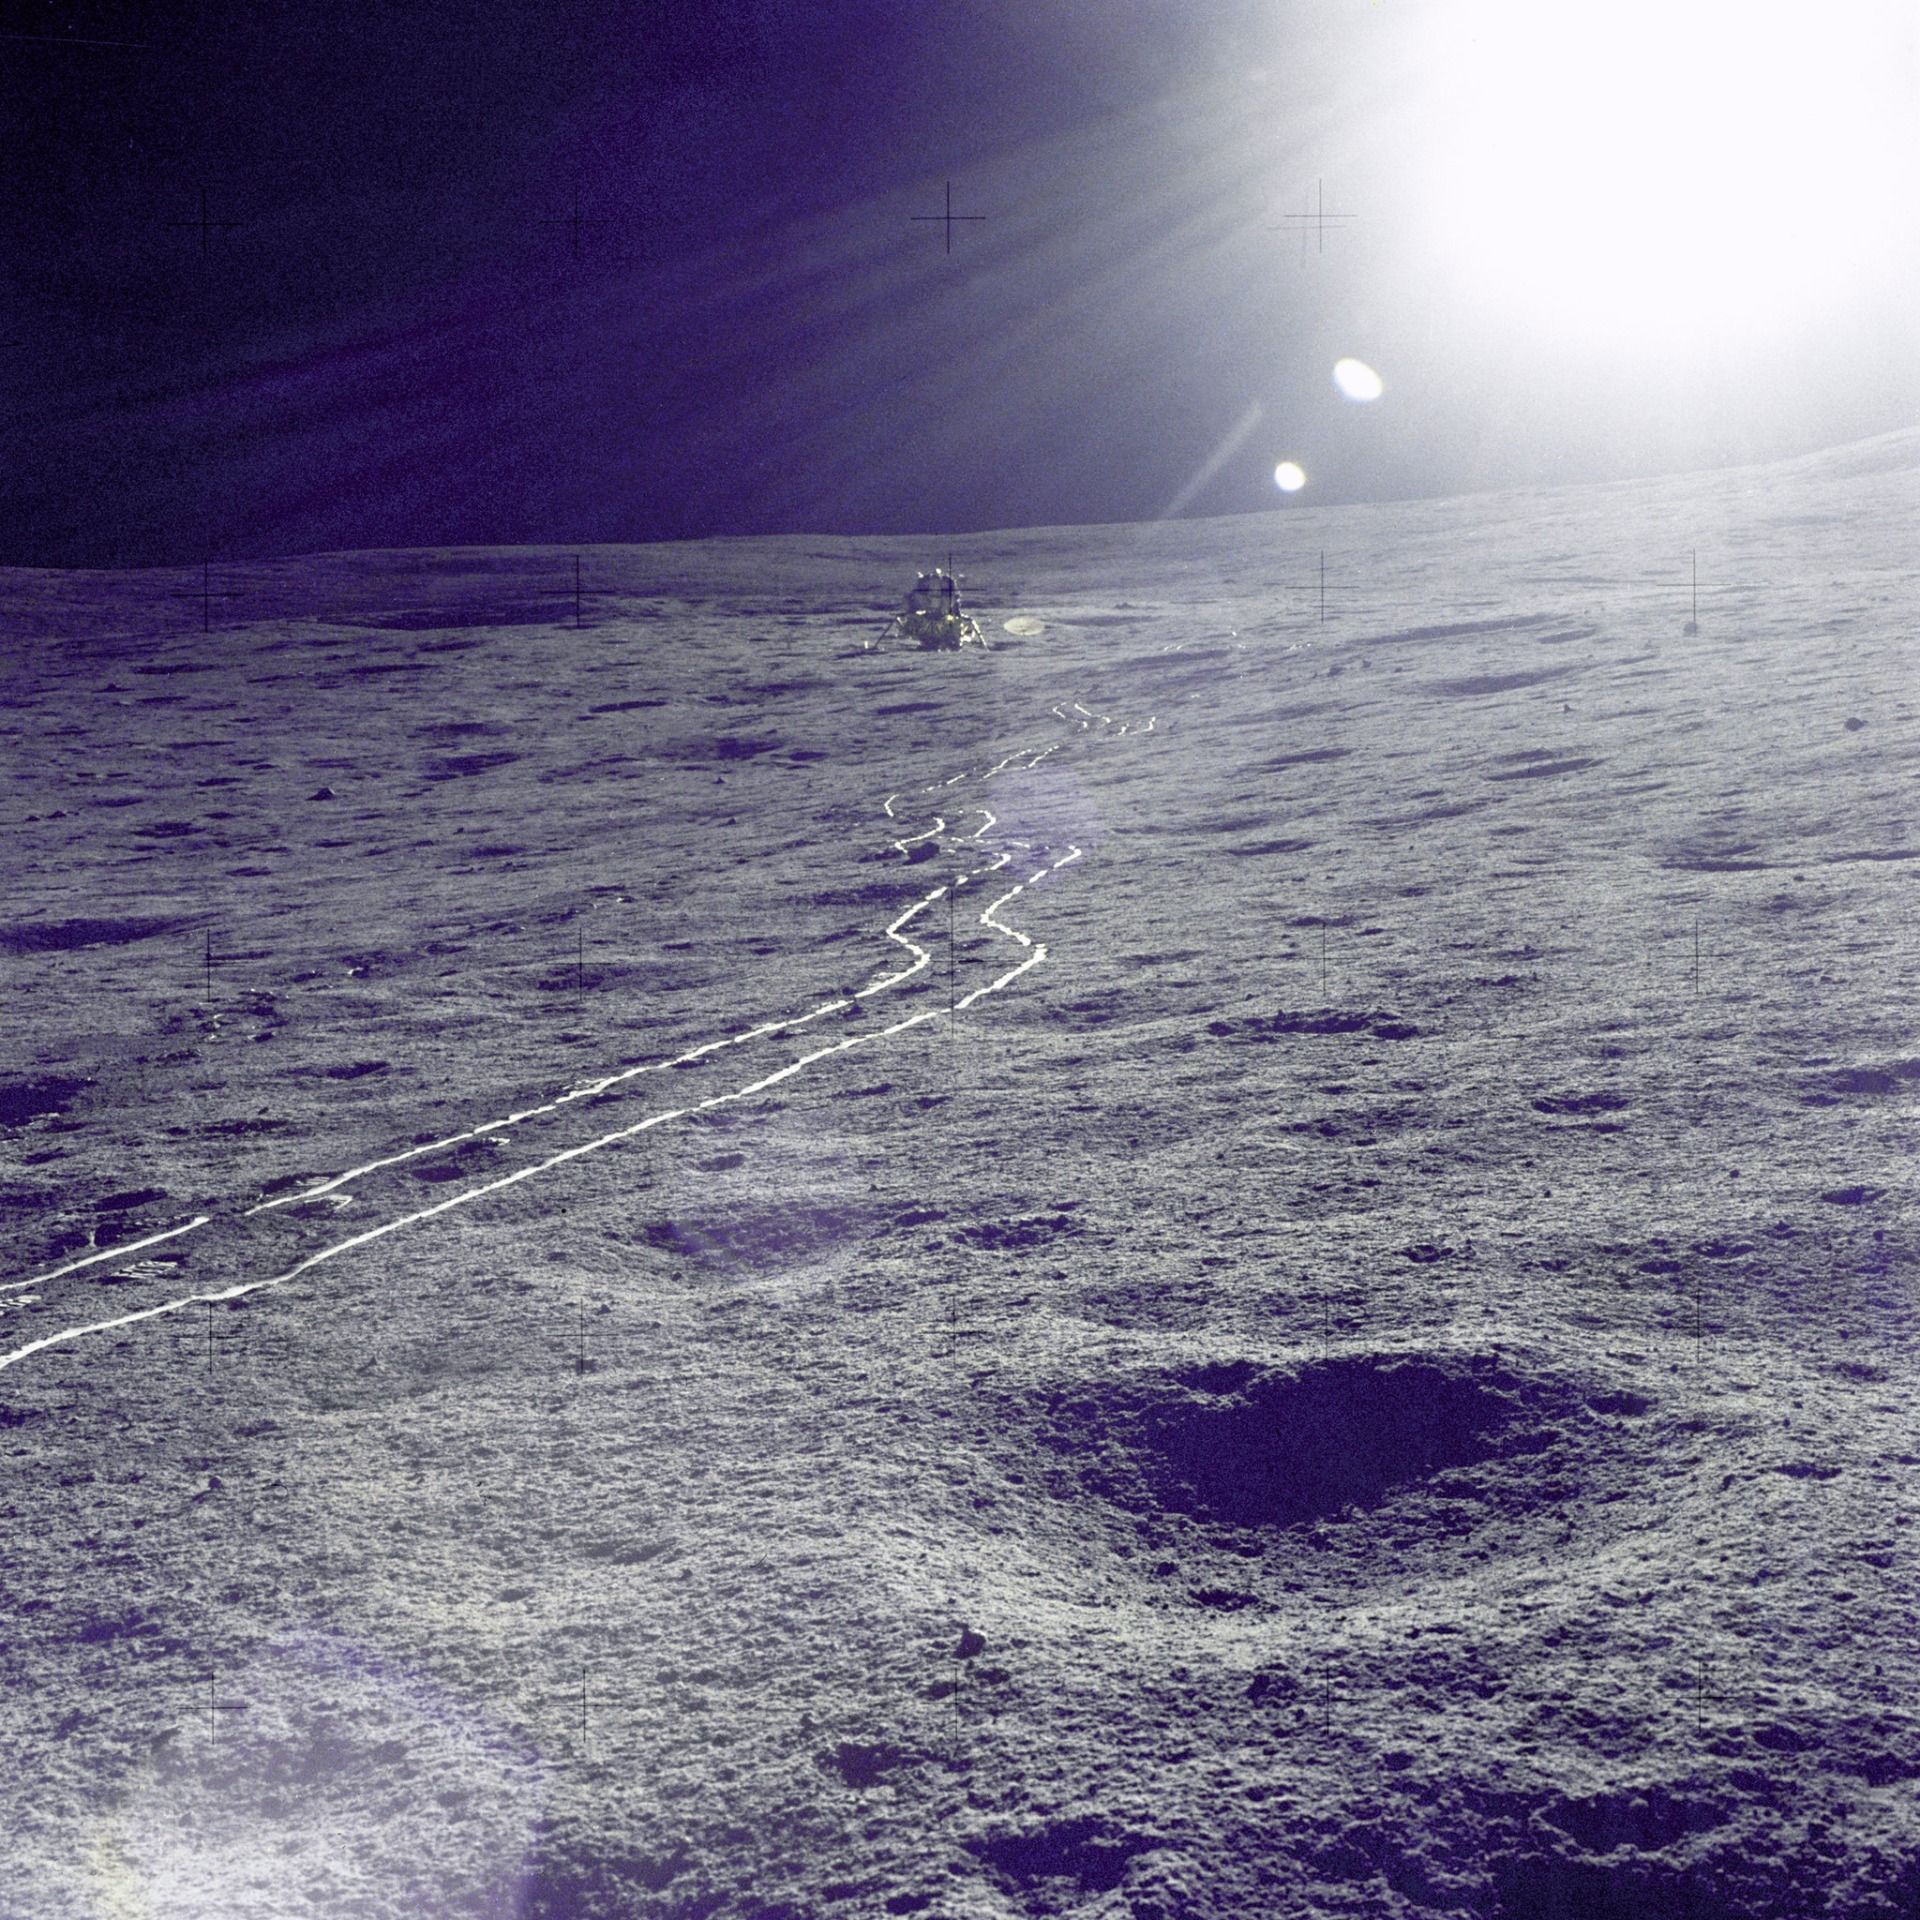 Tracks on the Moon from Apollo 14